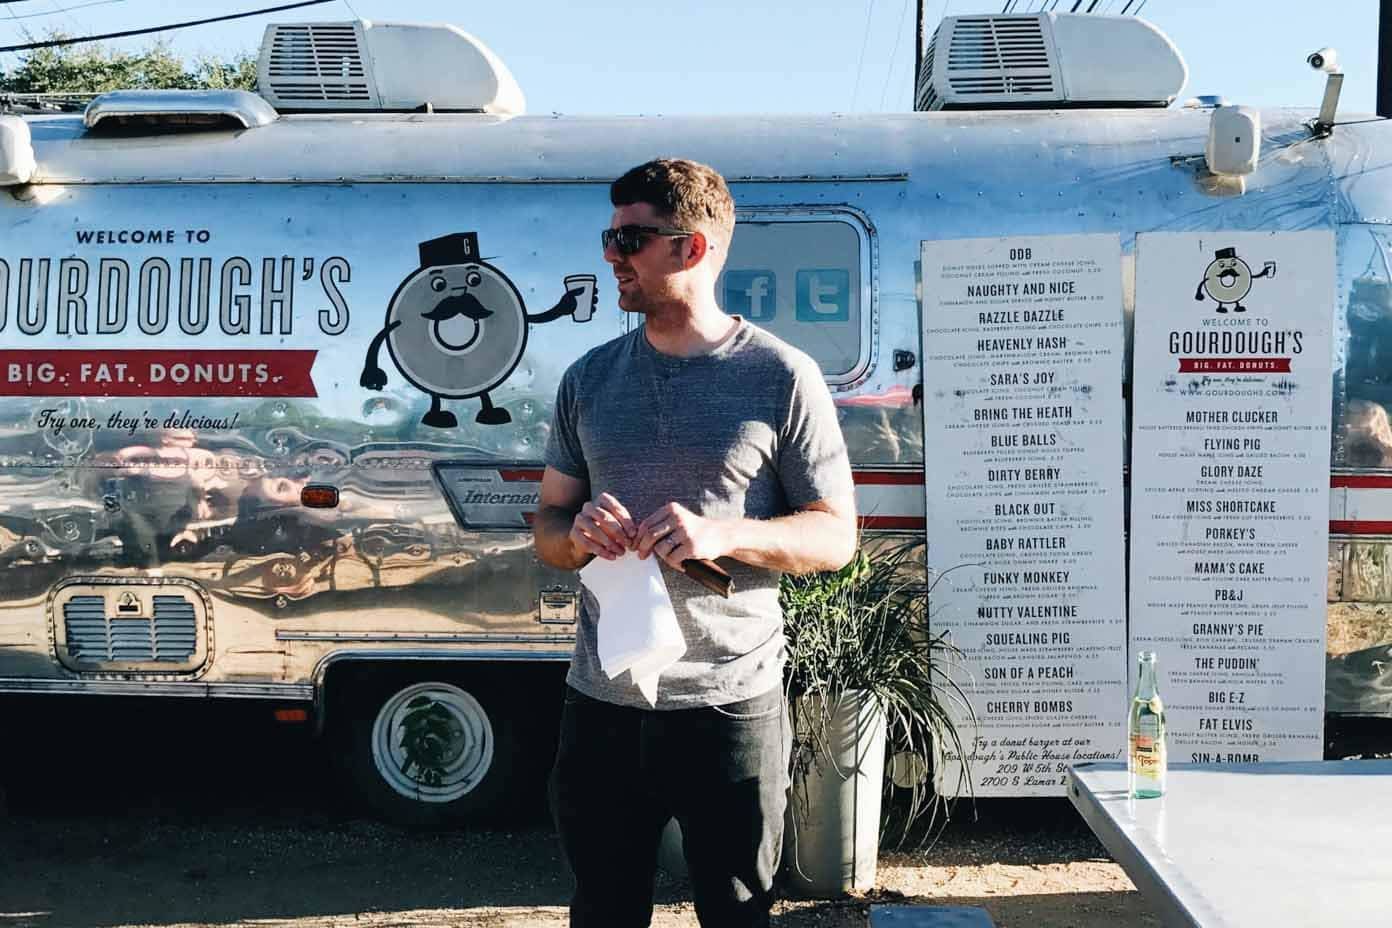 Man standing in front of a donut truck.